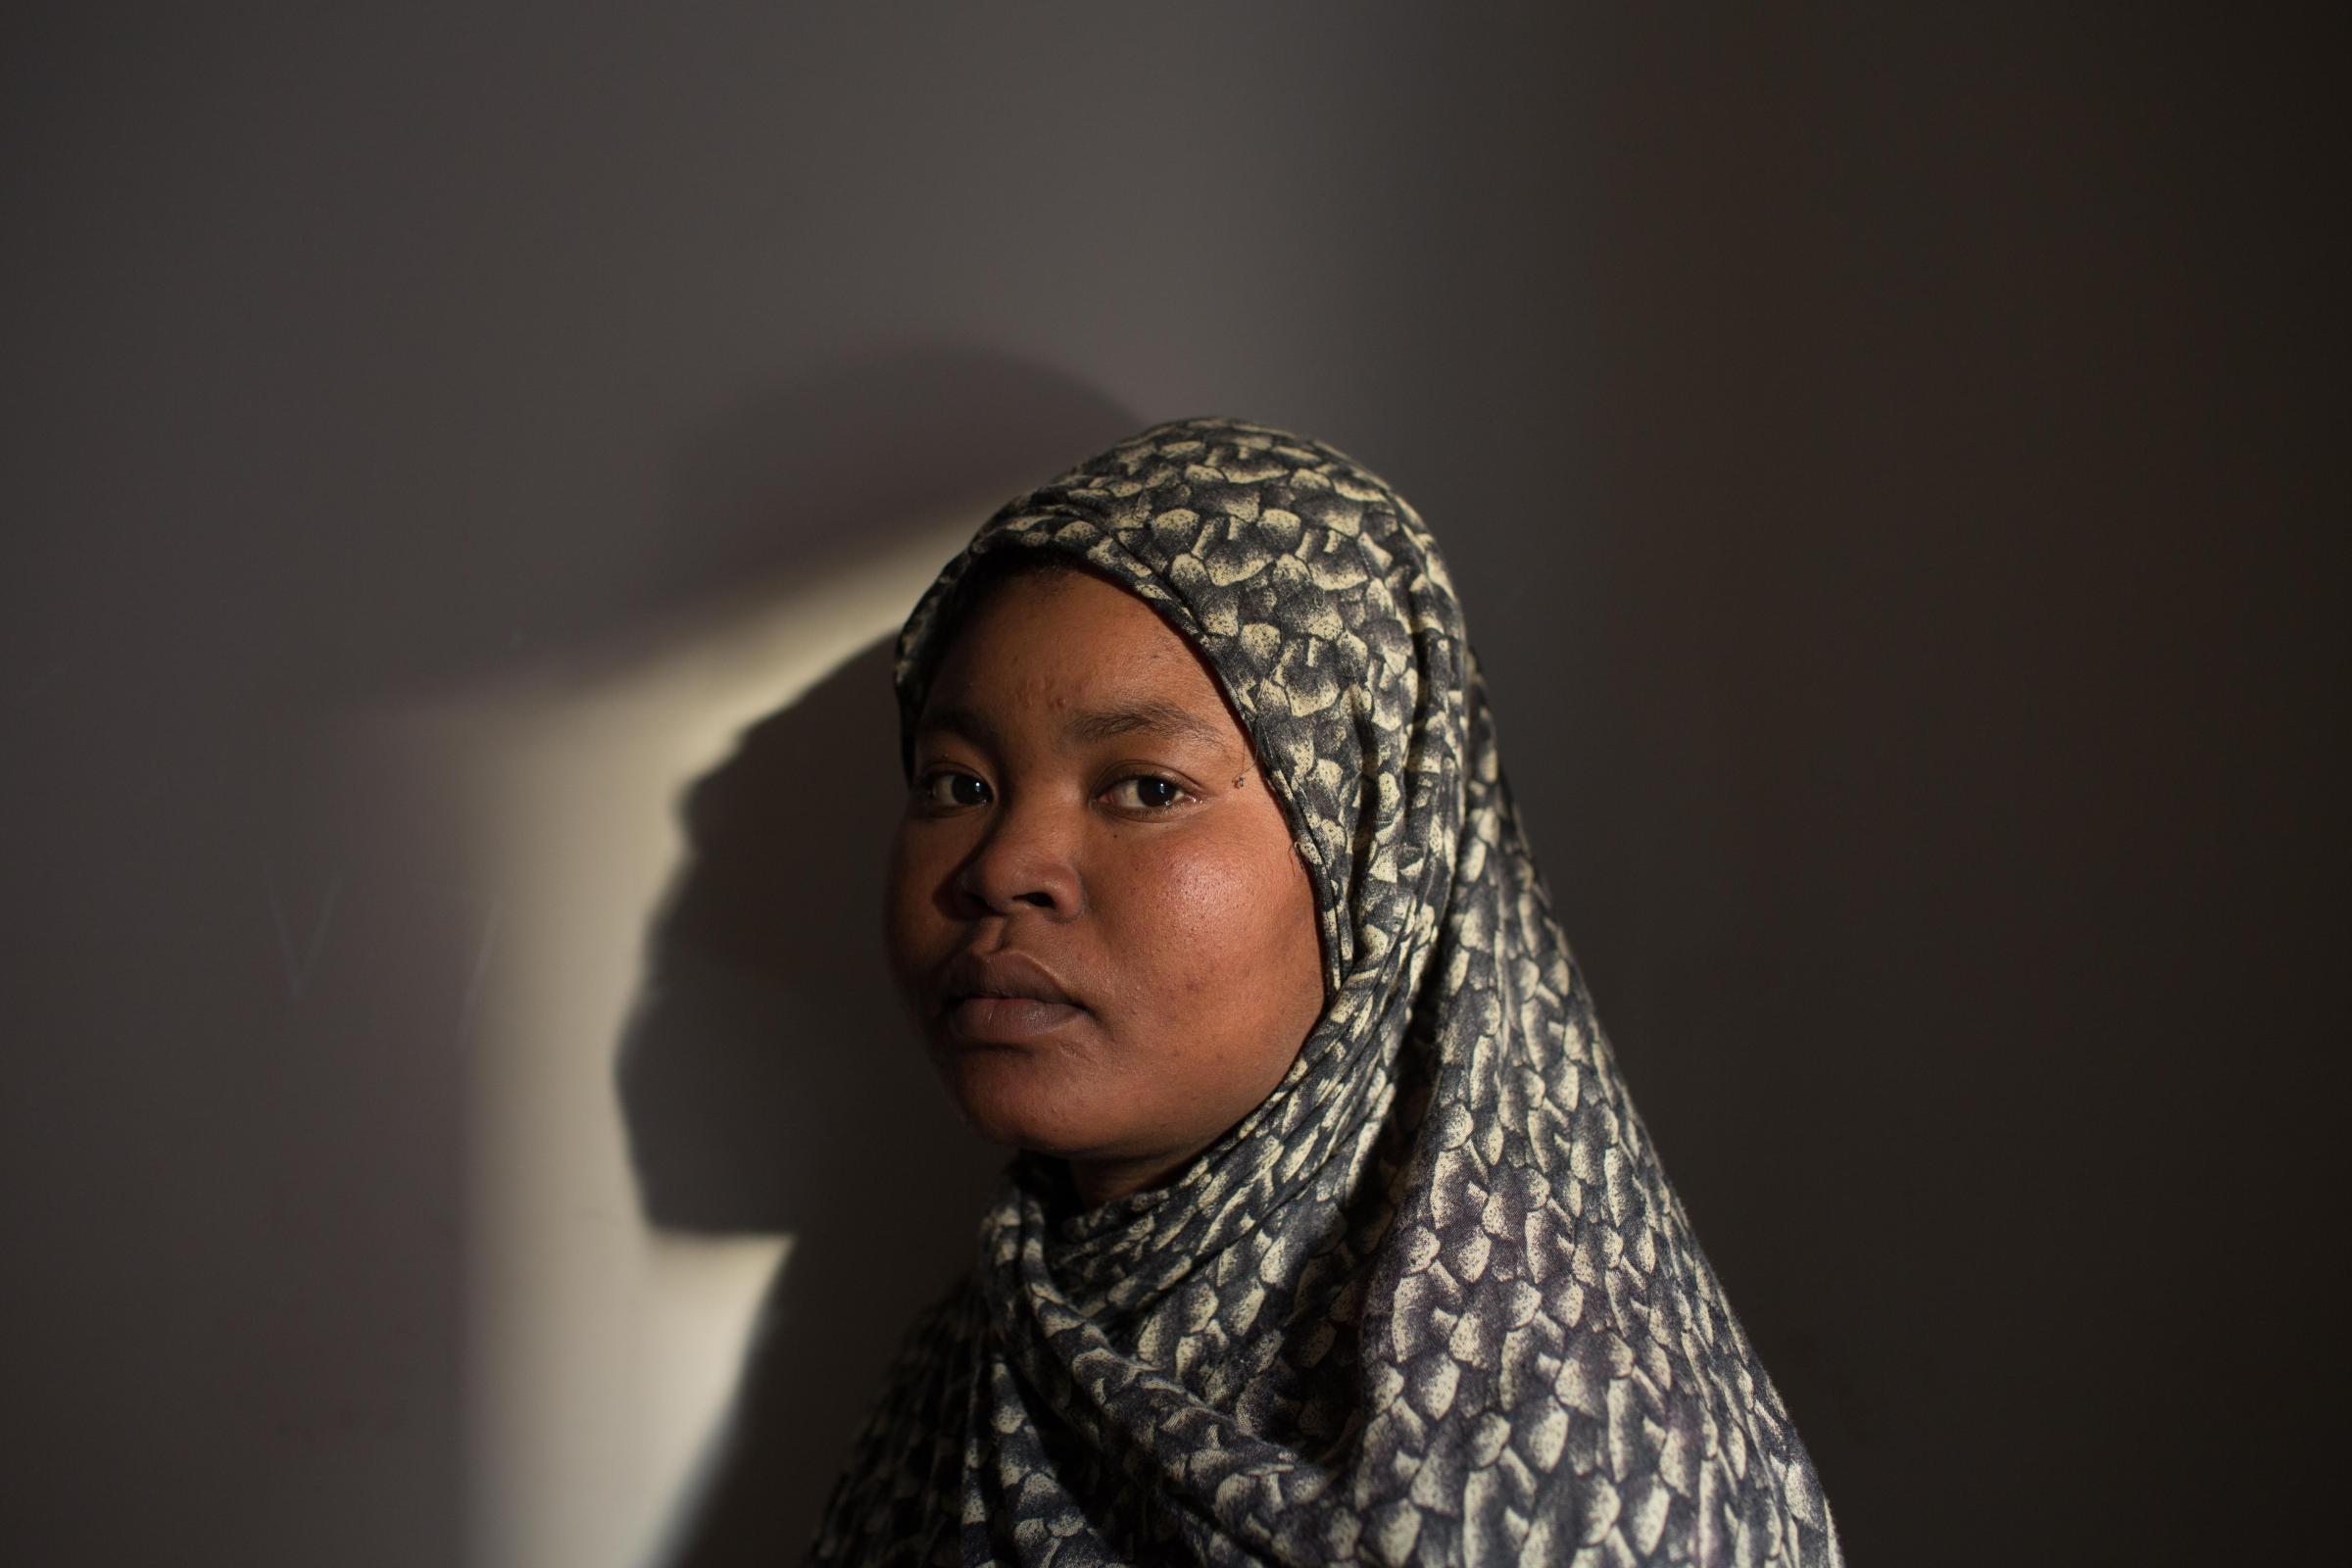 Malaz Al-Bakr Ibrahim, 23, who has worked as a babysitter in Egypt since 2020 because of the economic and political situation in Sudan, poses for a...